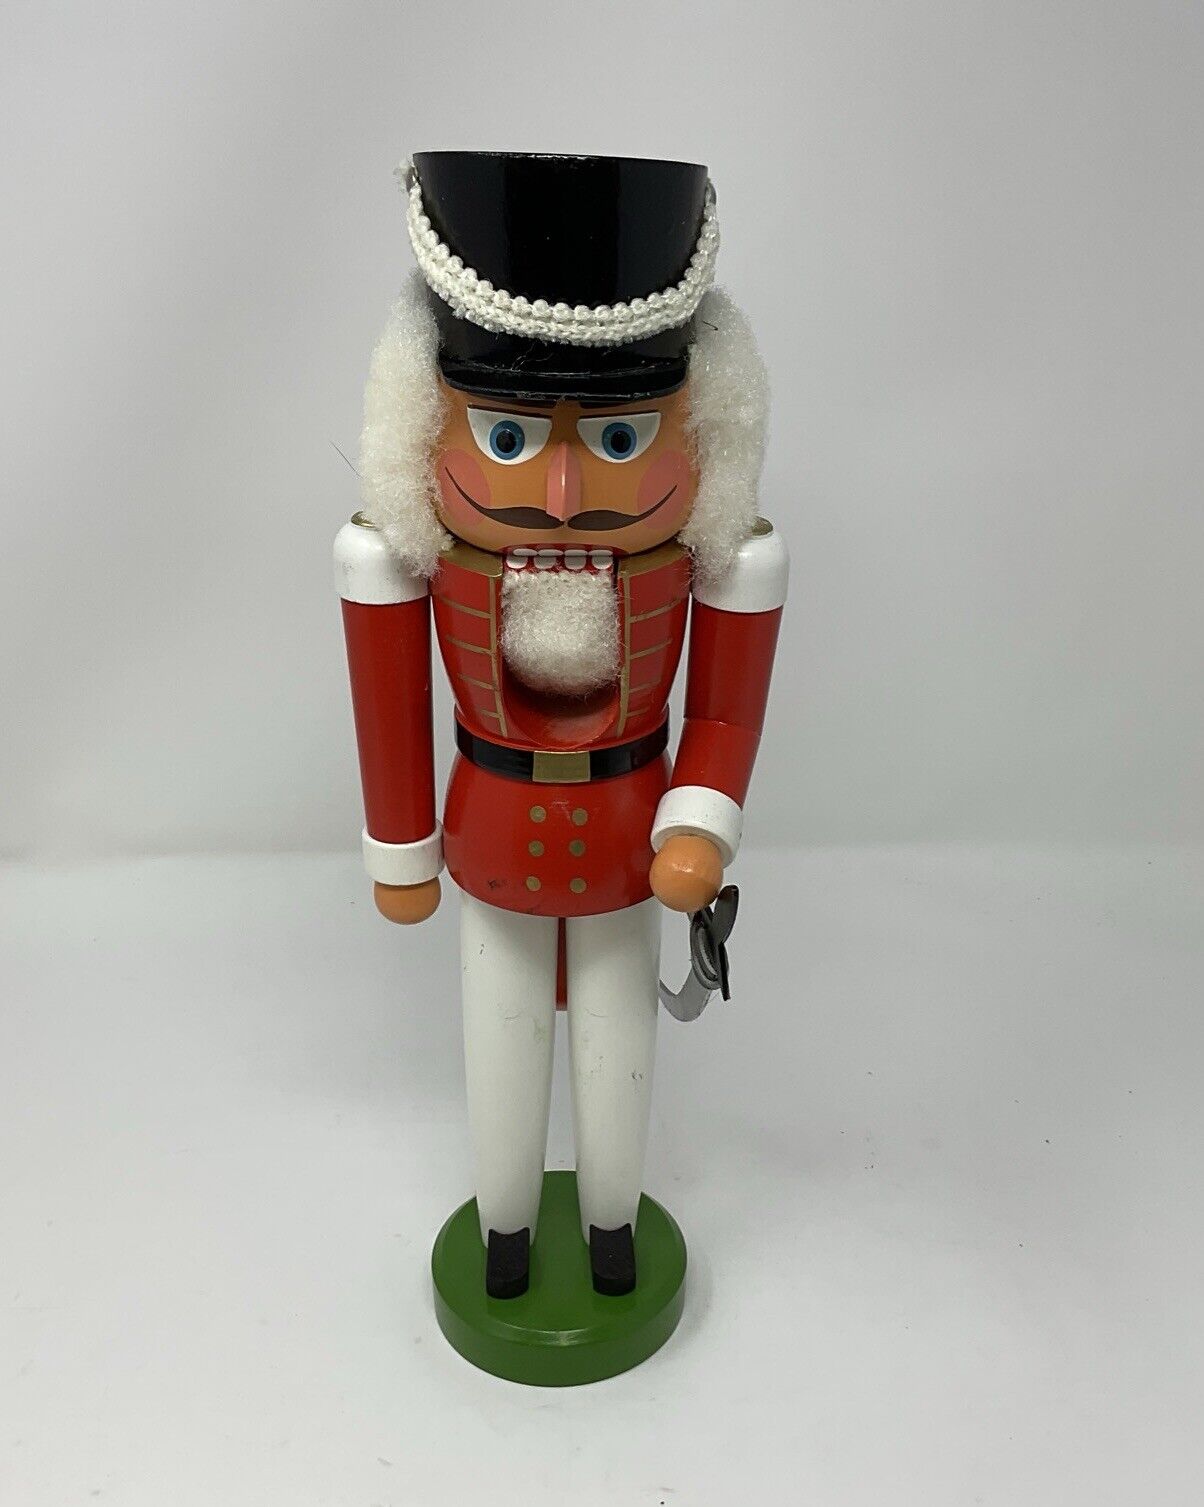 Vintage 13 inch Wooden Traditional Soldier Nutcracker Hand Crafted Decorative